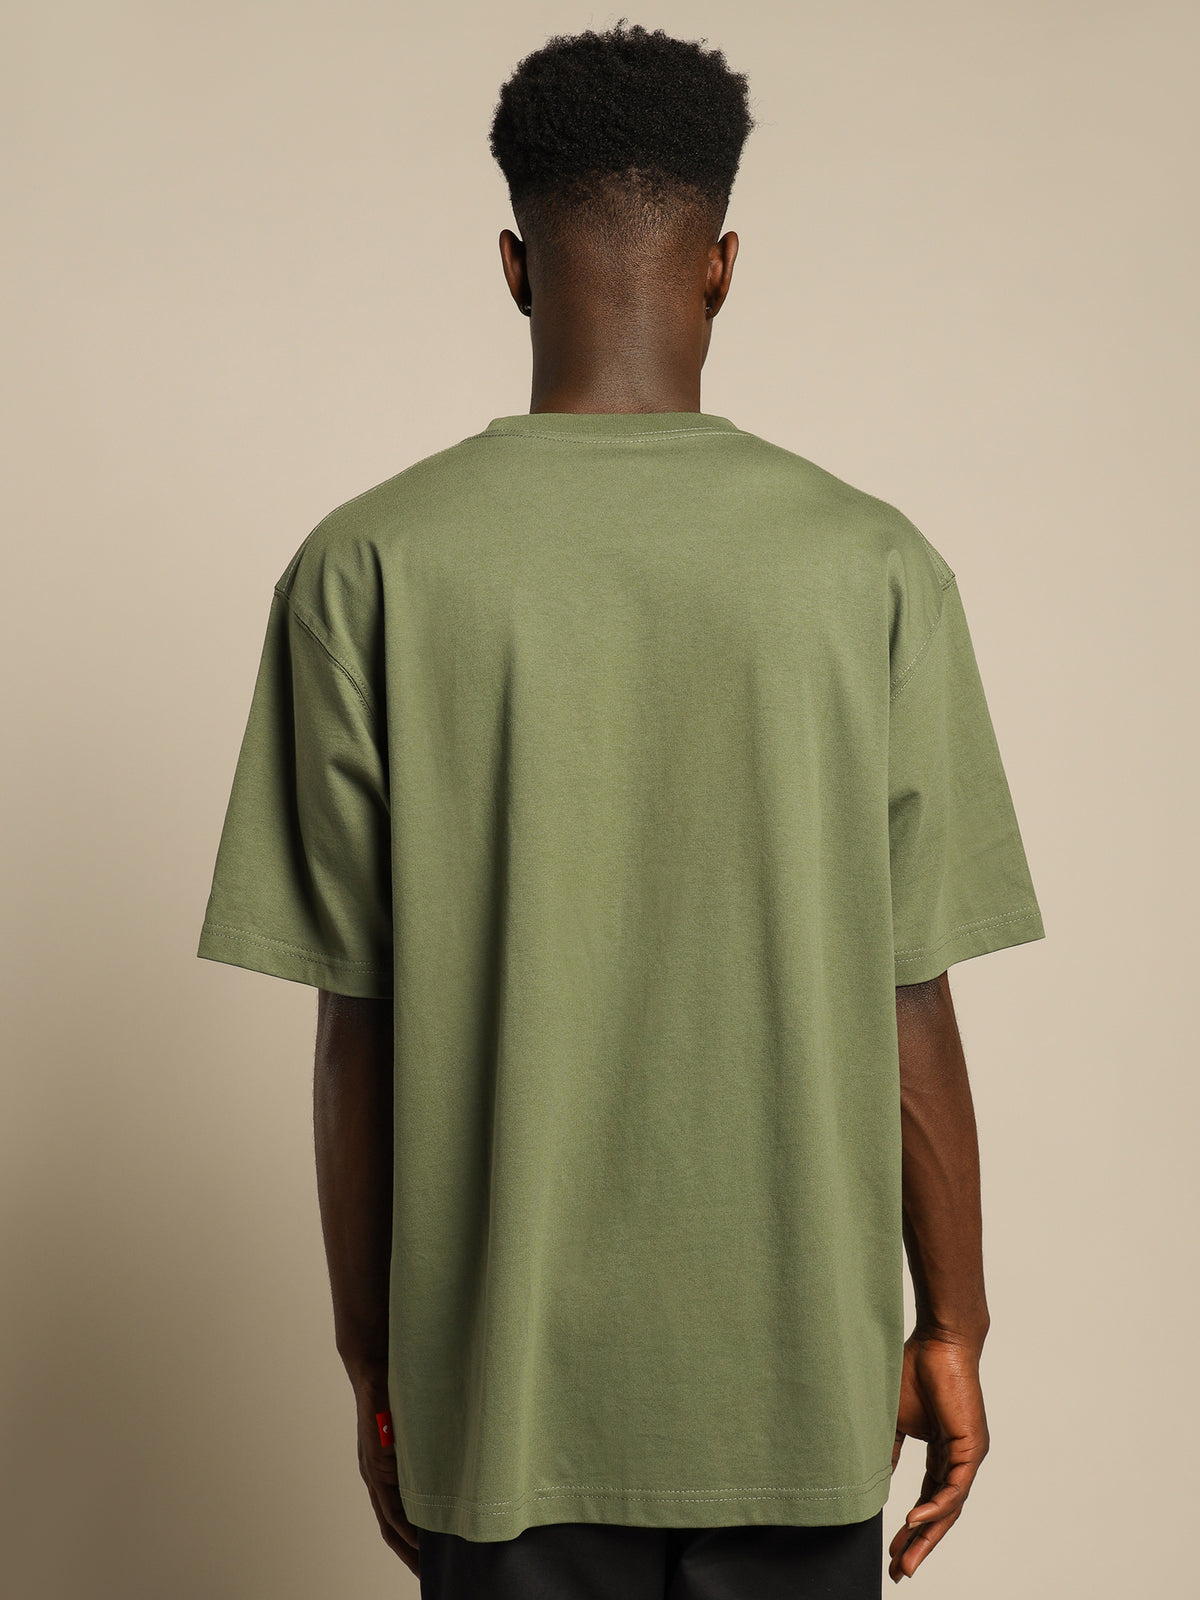 Ceremony T-Shirt in Forest Green